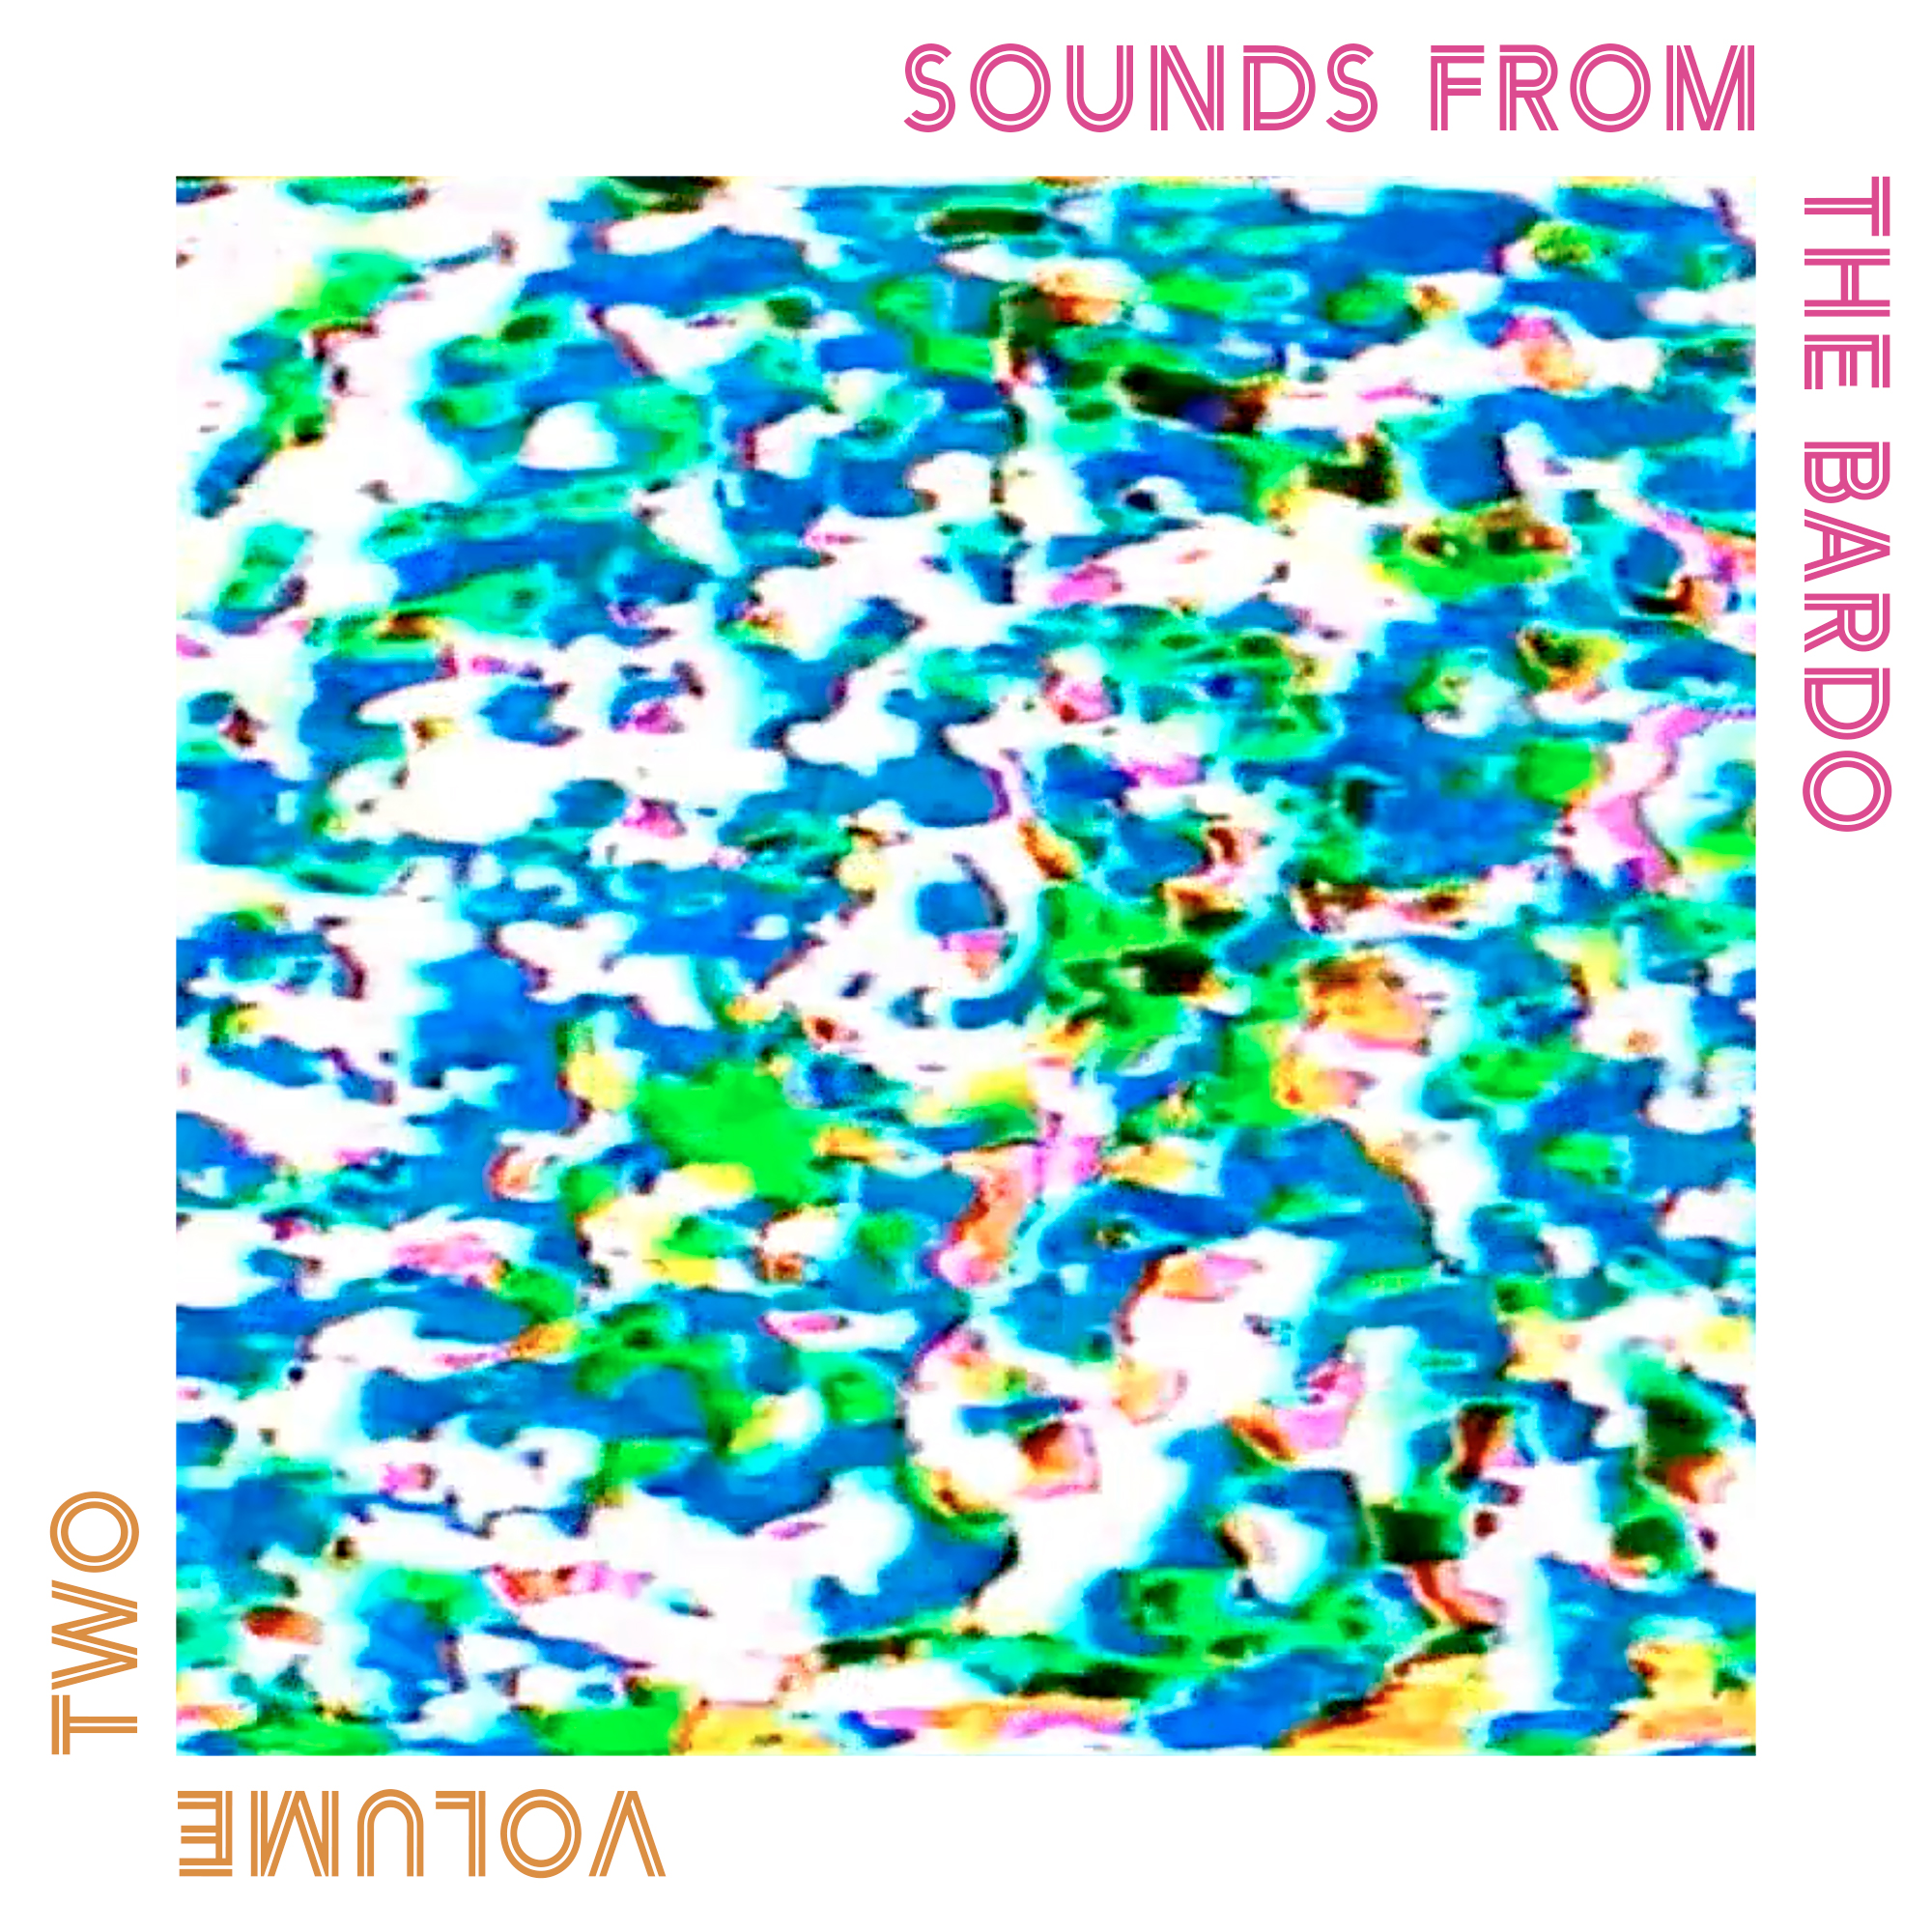 Song Premiere: Scott Metzger, Tony Leone & Jeff Hill “Soundcheck Jam II” from ‘Sounds From the Bardo, Vol. II’